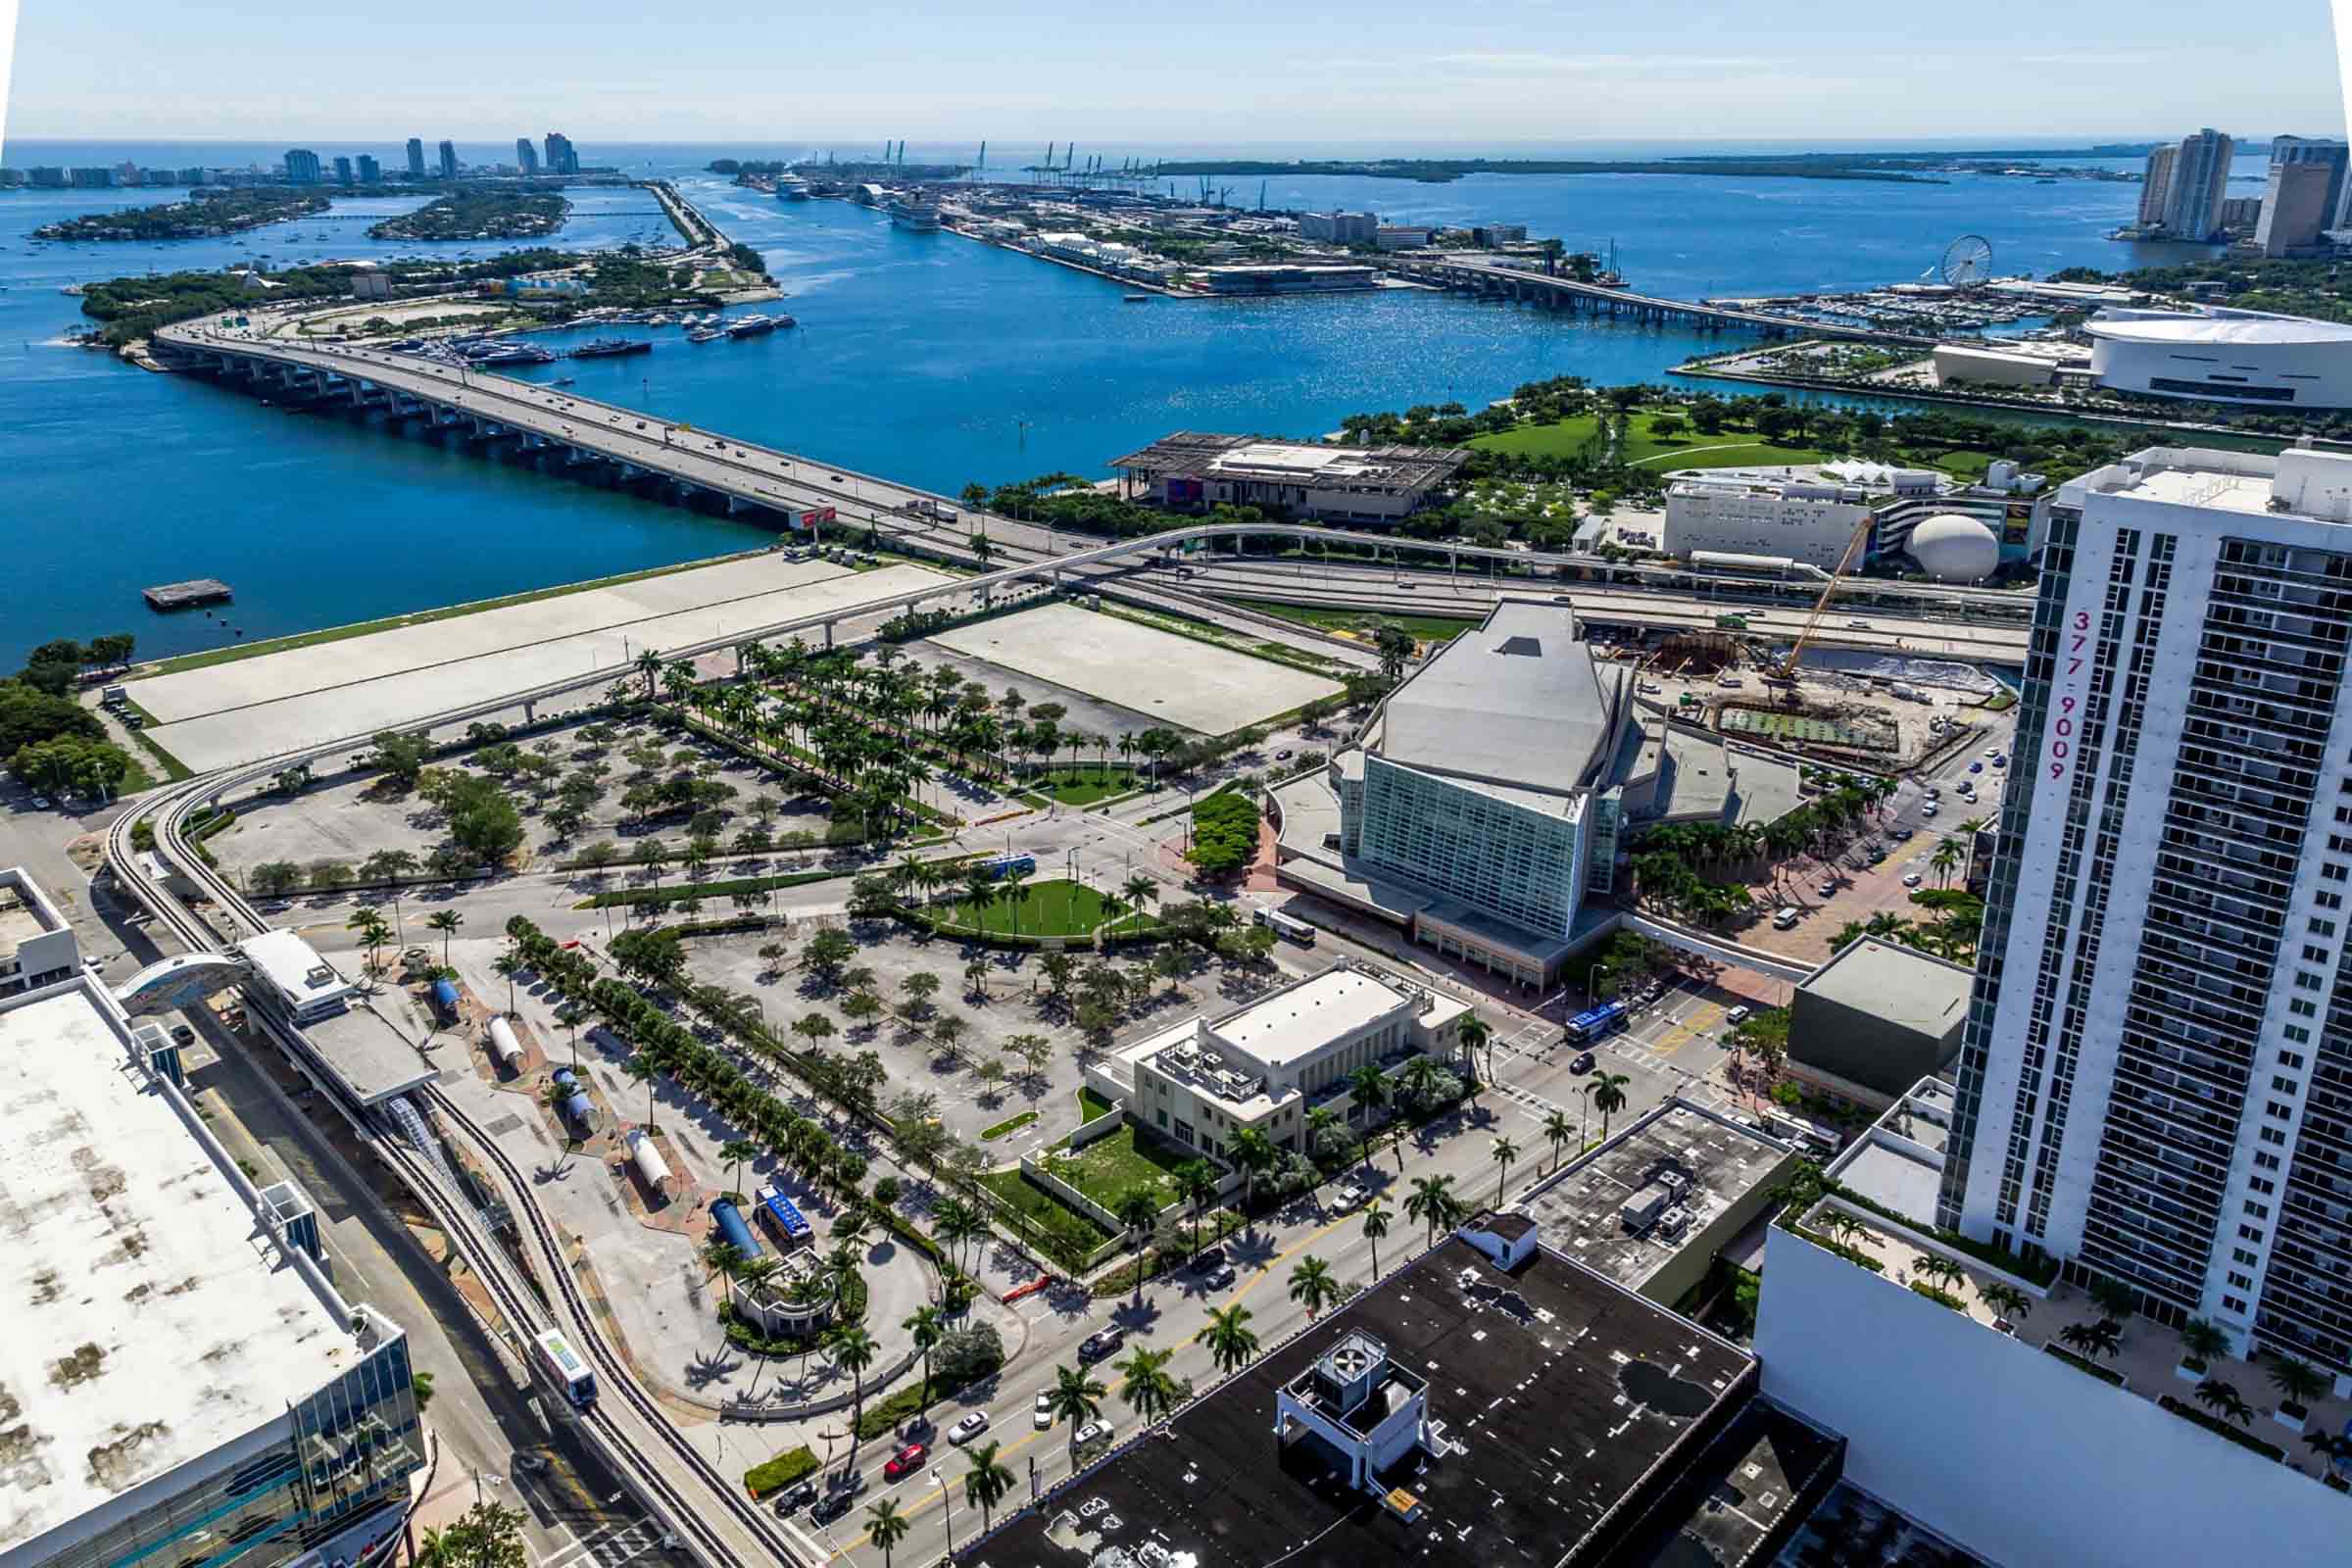 Terra’s $1.2 Billion Downtown Miami Deal Is Off. What Does This Mean For The Miami Real Estate Market?